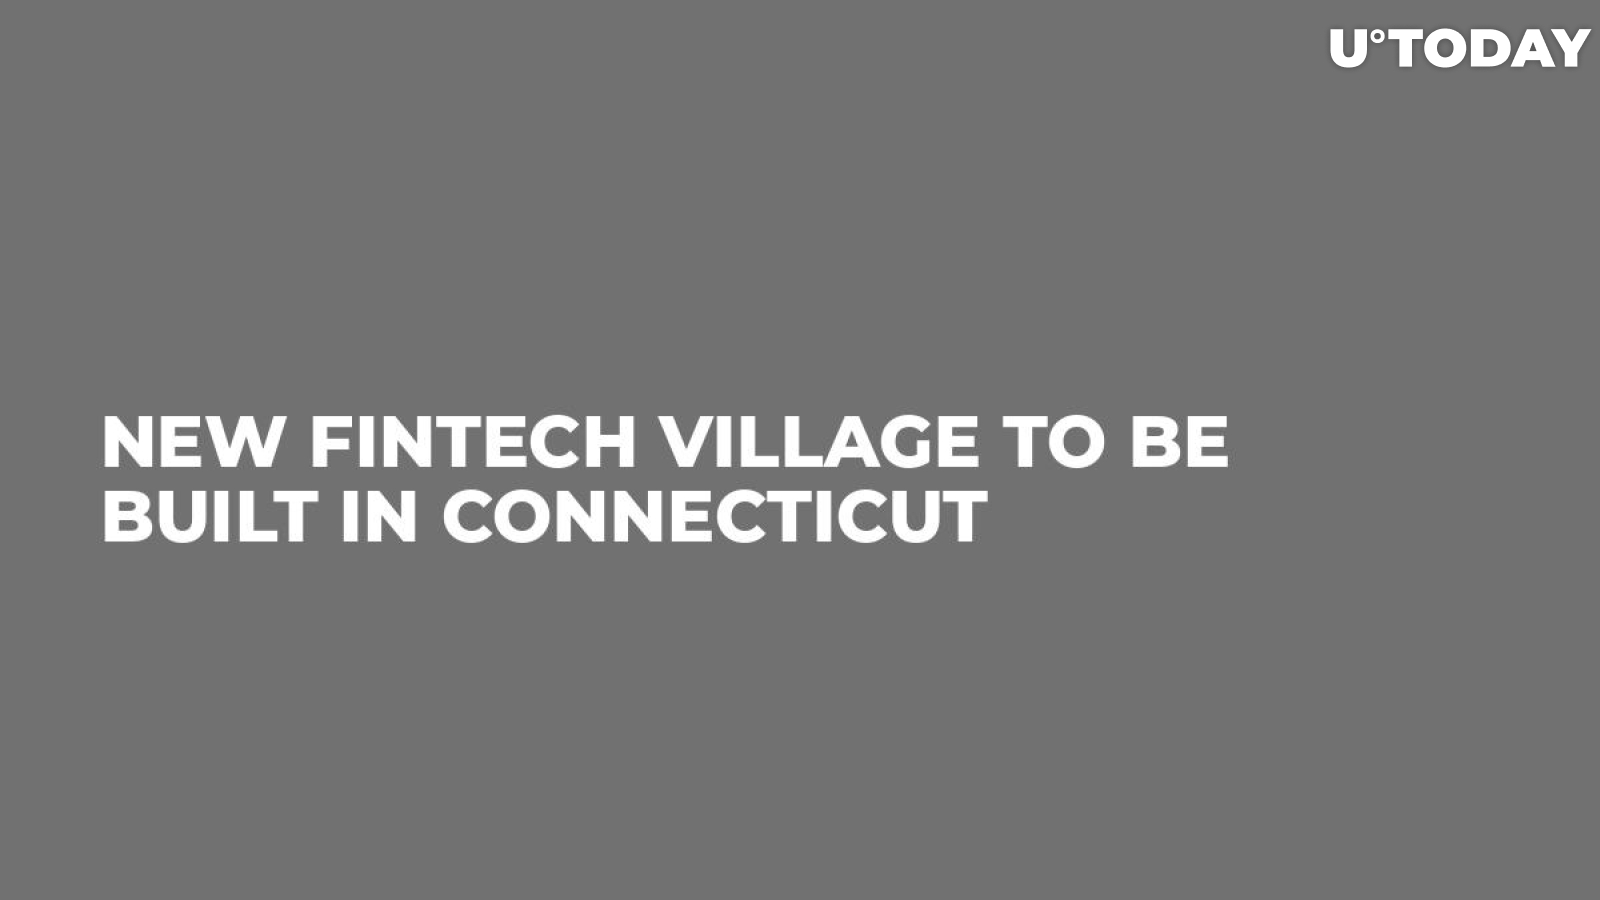 New Fintech Village to Be Built in Connecticut